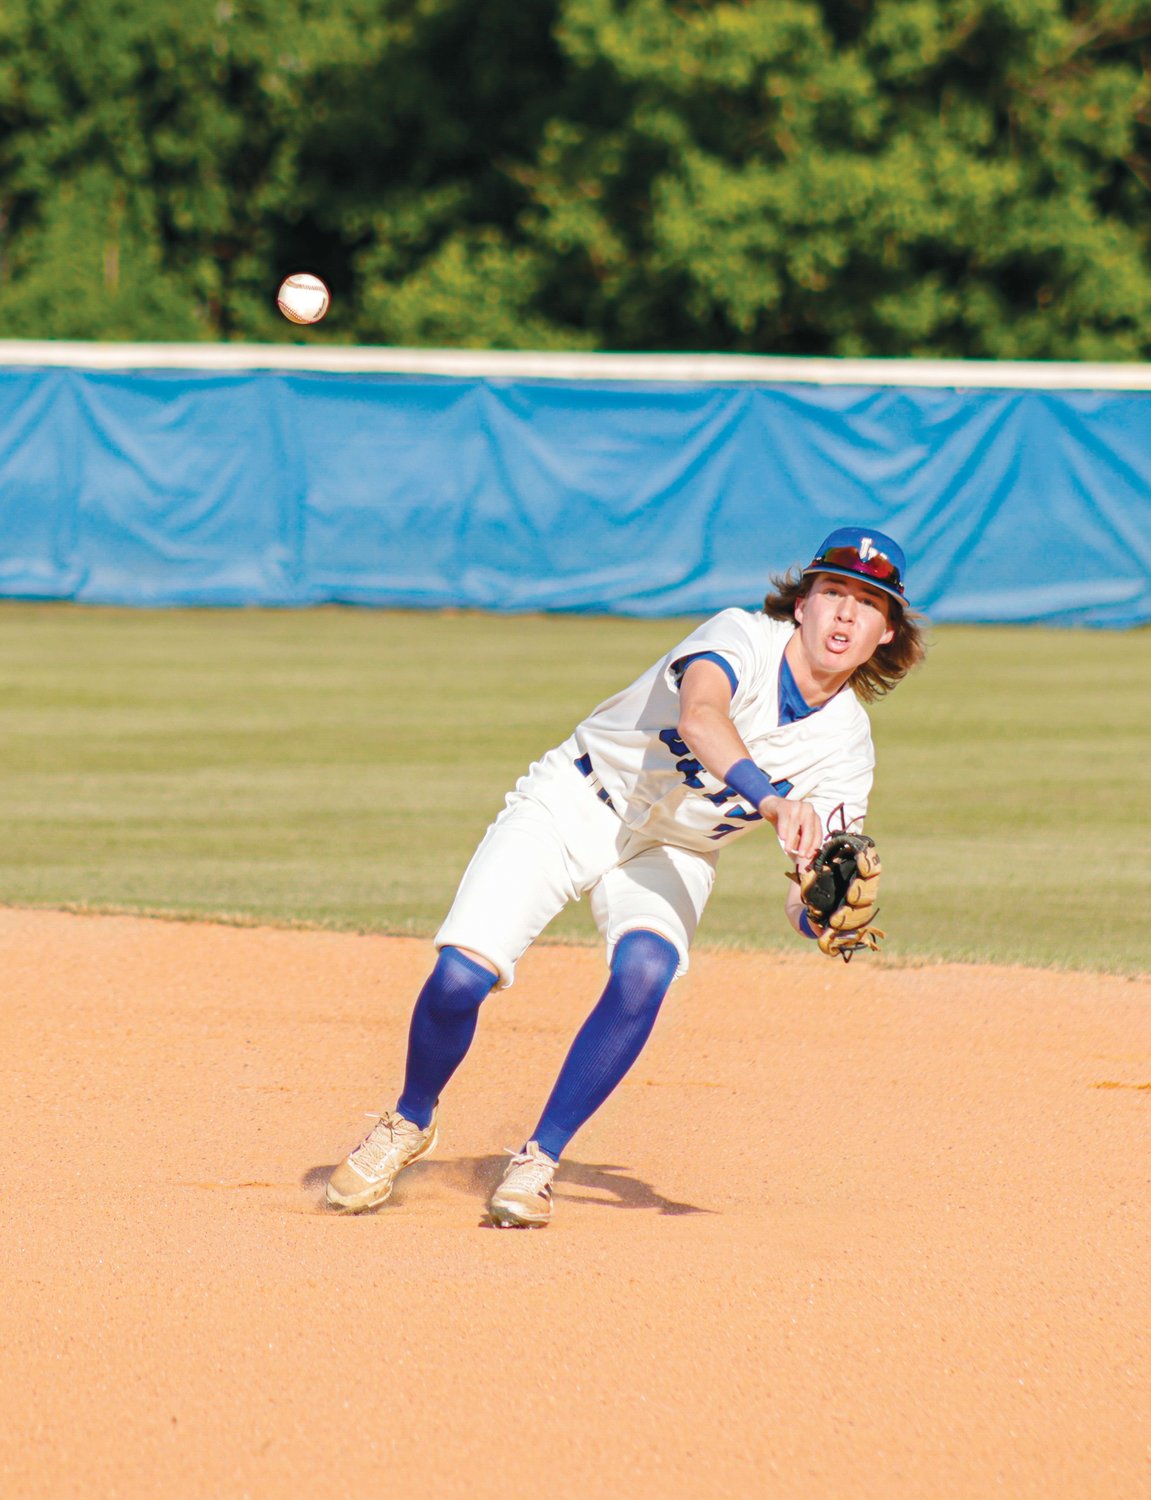 Jordan-Matthews junior shortstop Jackson Headen throws the ball toward first base in an attempt to get a runner out in the Jets' 3-1 first-round playoff victory over the Southwest Edgecombe Cougars on May 10.